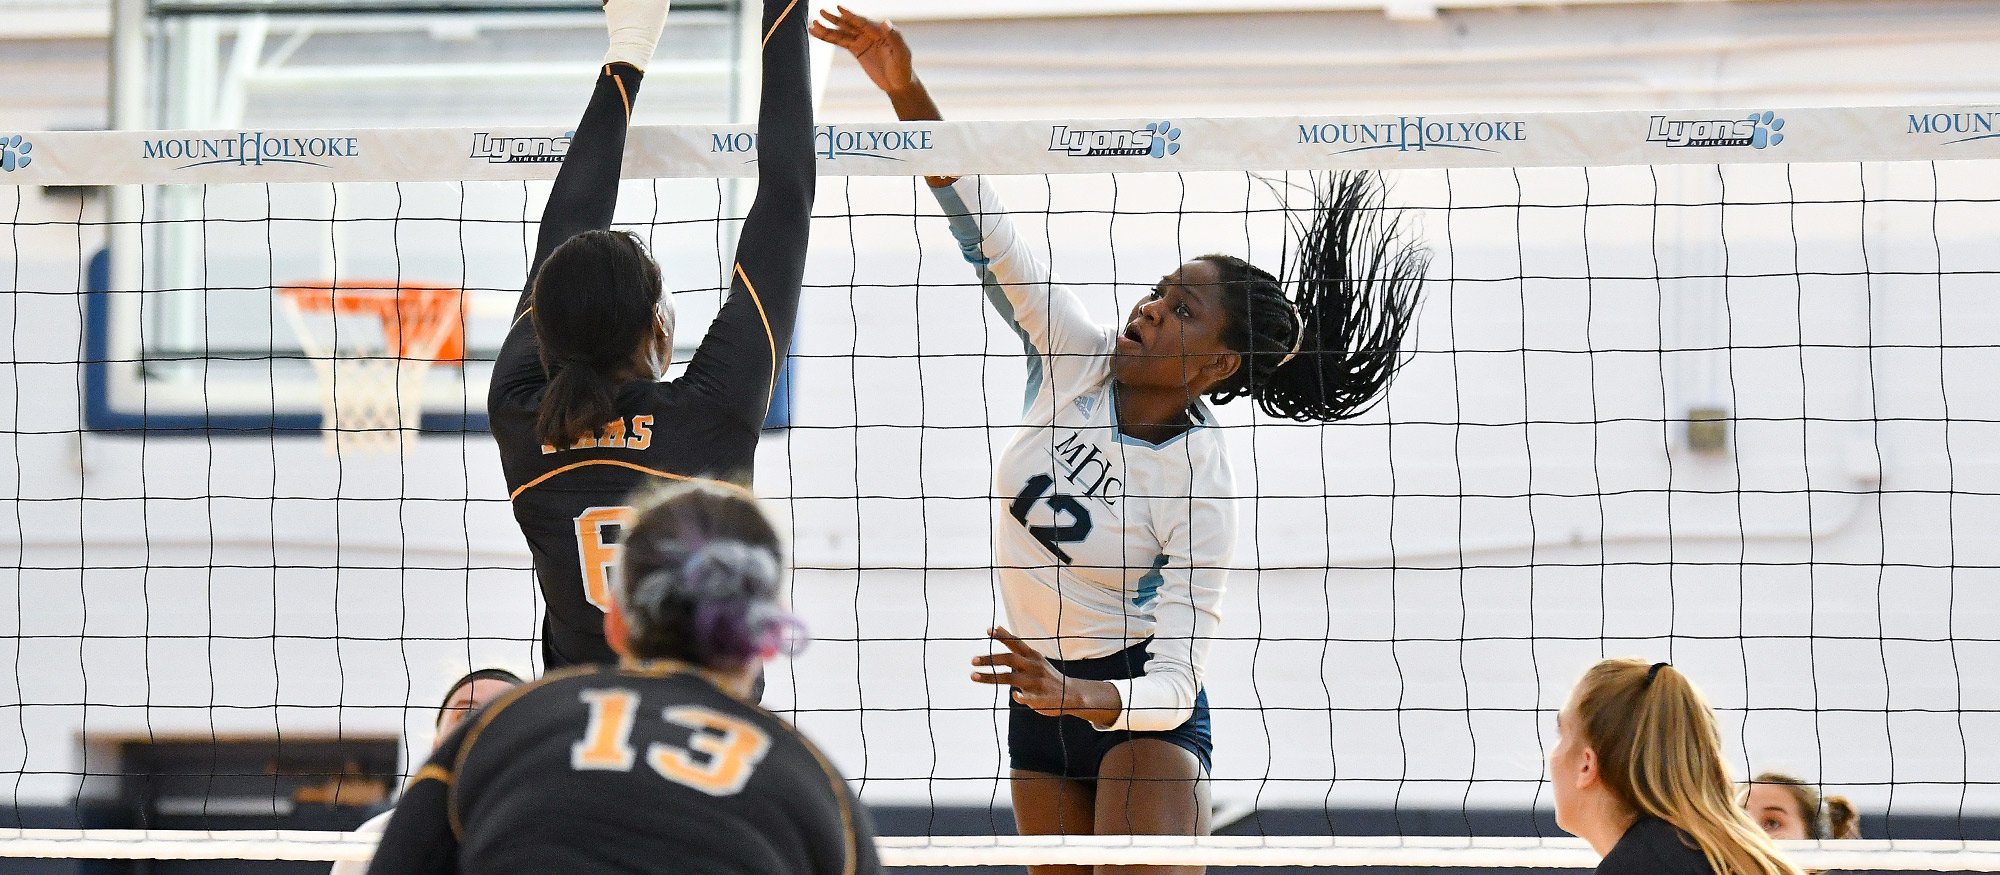 Marion Abeja led Mount Holyoke in digs, blocks and kills in the Lyons' 3-0 loss to No. 18 MIT on Sept. 17, 2022. (RJB Sports file photo)